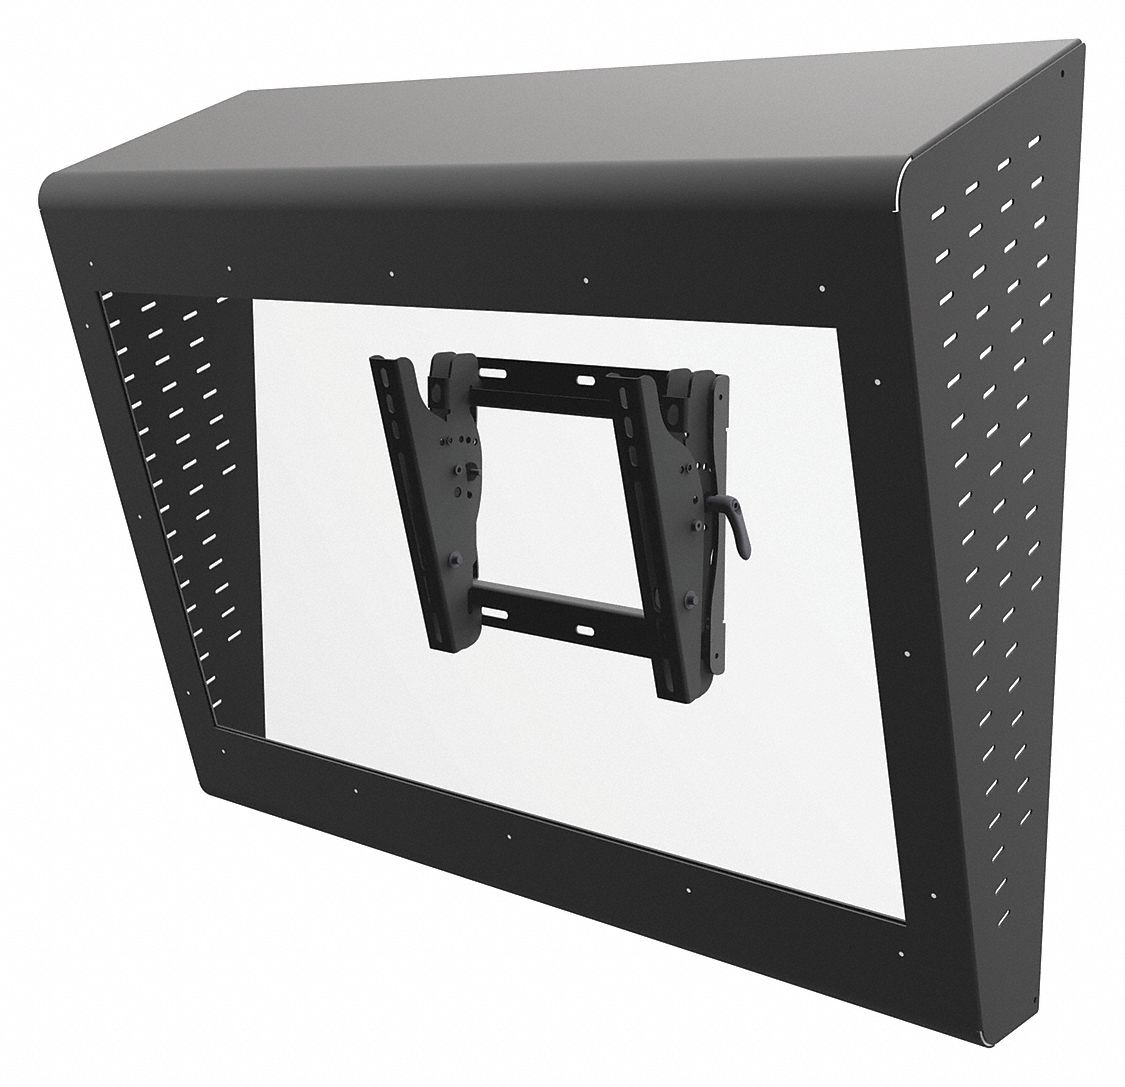 TV Wall Mount: Tilt, 125 lb Load Capacity, For 22 in to 32 in Flat Panels